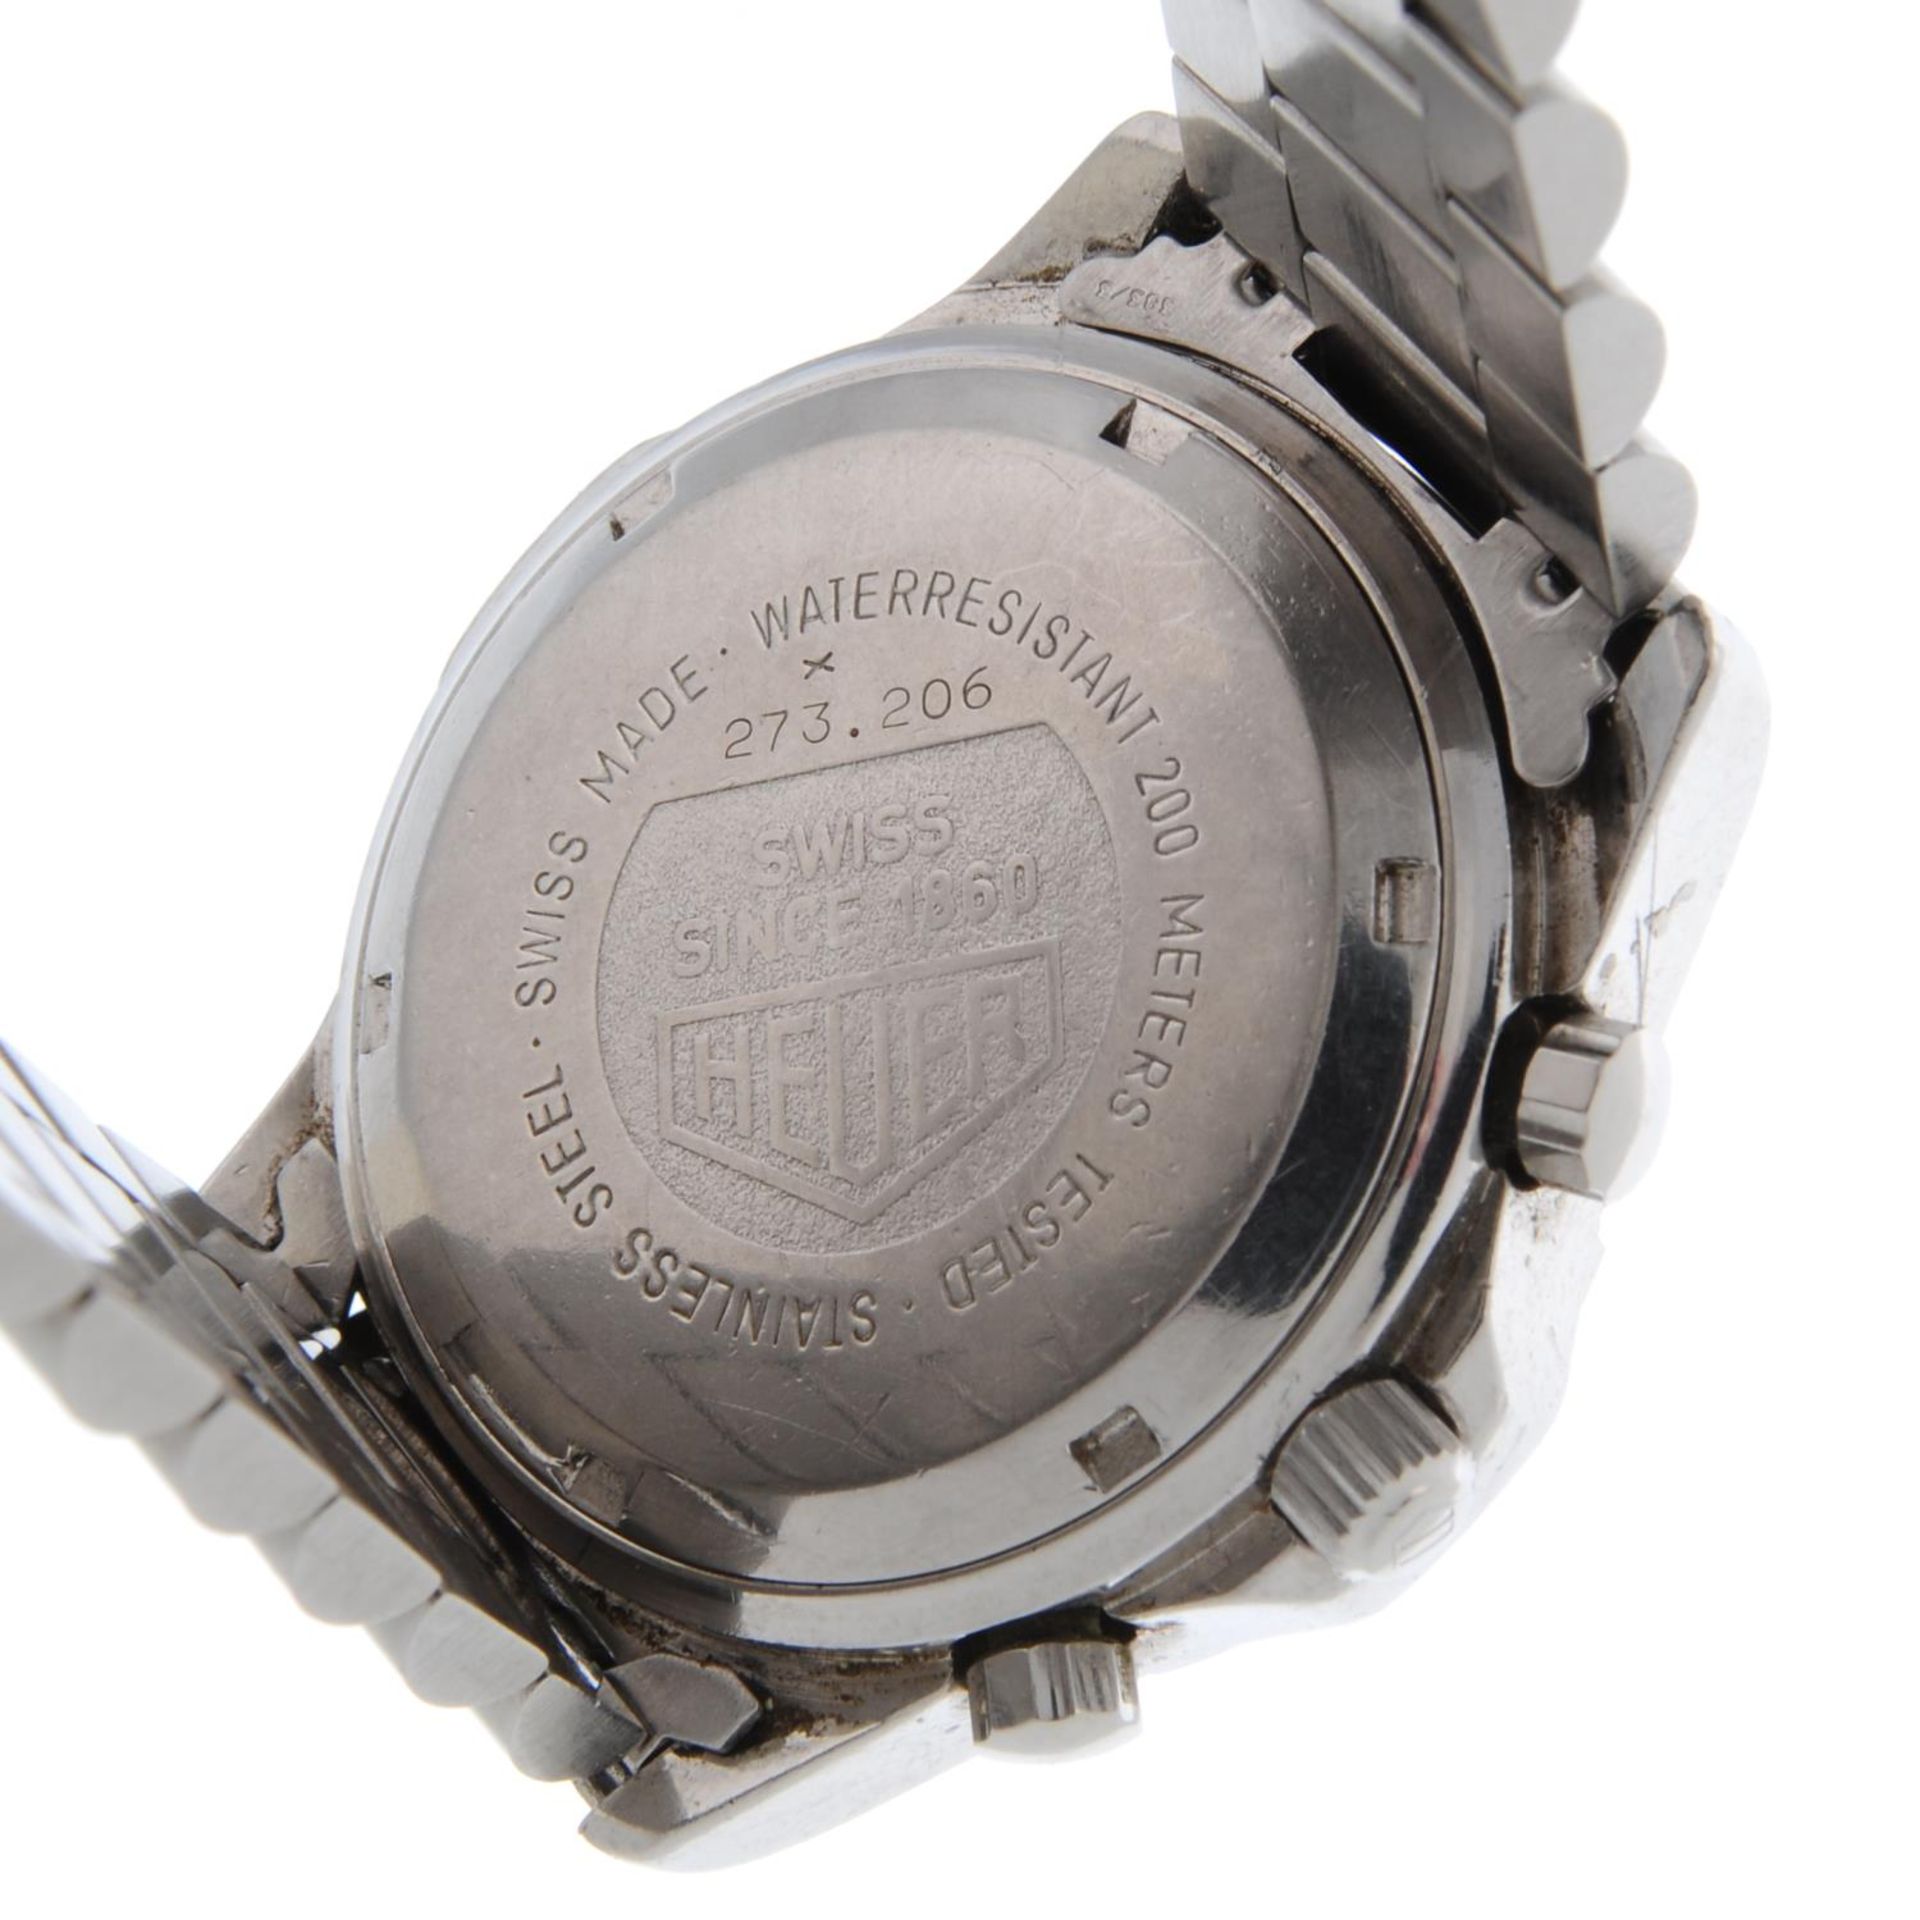 TAG HEUER - a 2000 series chronograph bracelet watch. - Image 4 of 4